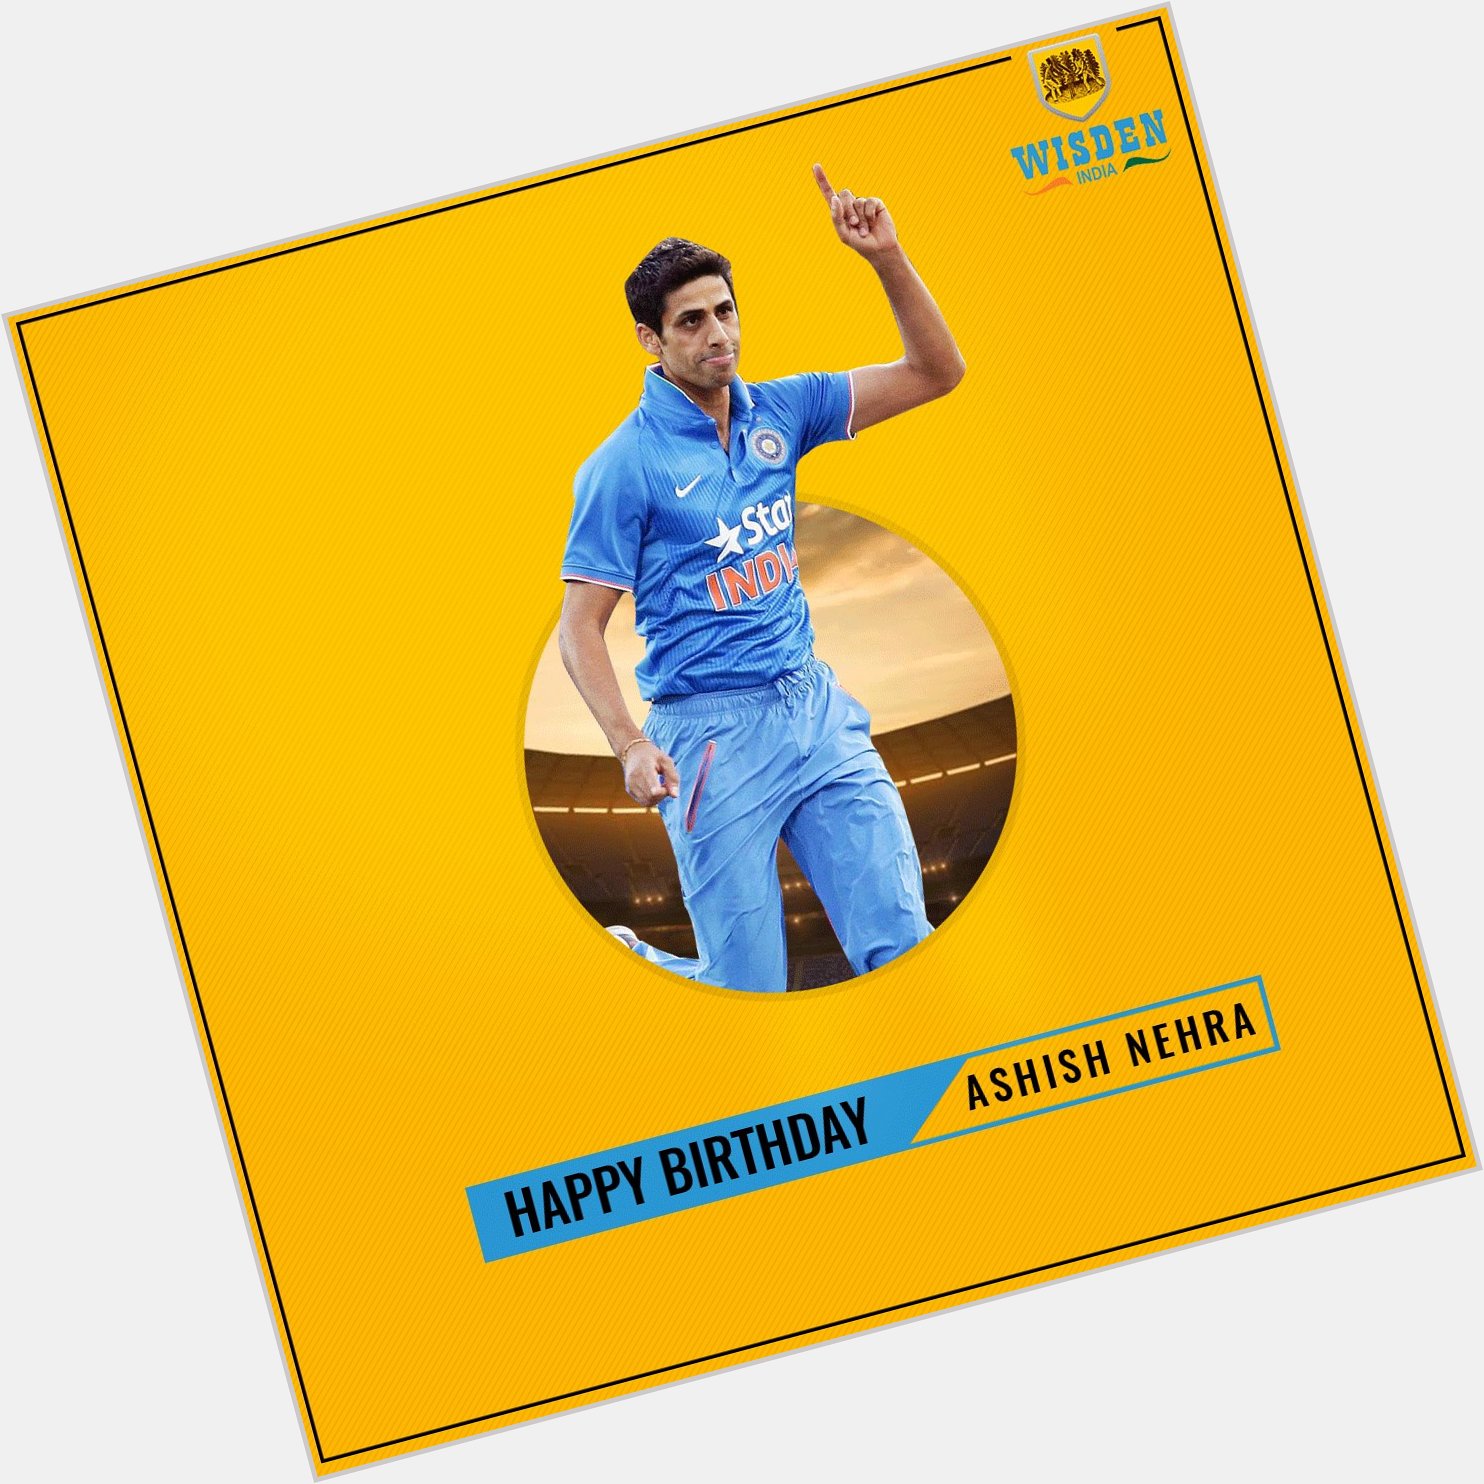 Wishing a very Happy Birthday to Indian pacer Ashish Nehra! 